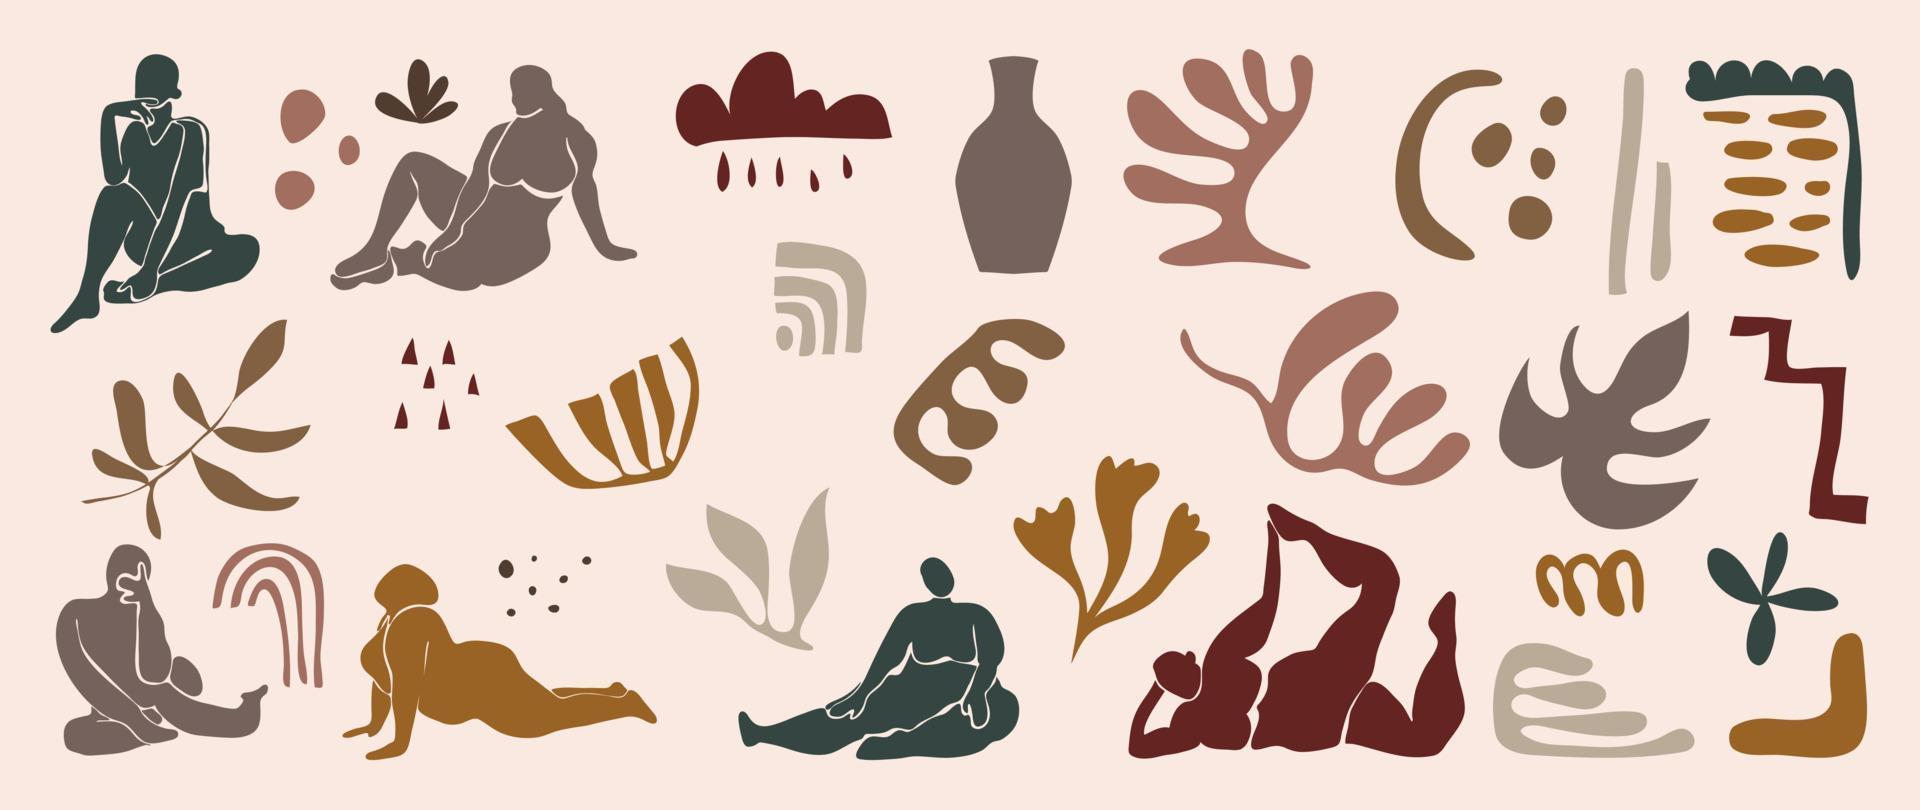 Set of abstract organic shapes inspired by matisse. Female body nude posture, vase, leaf papercut style earth tone color. Contemporary aesthetic vector element for logo, decoration, print, cover.